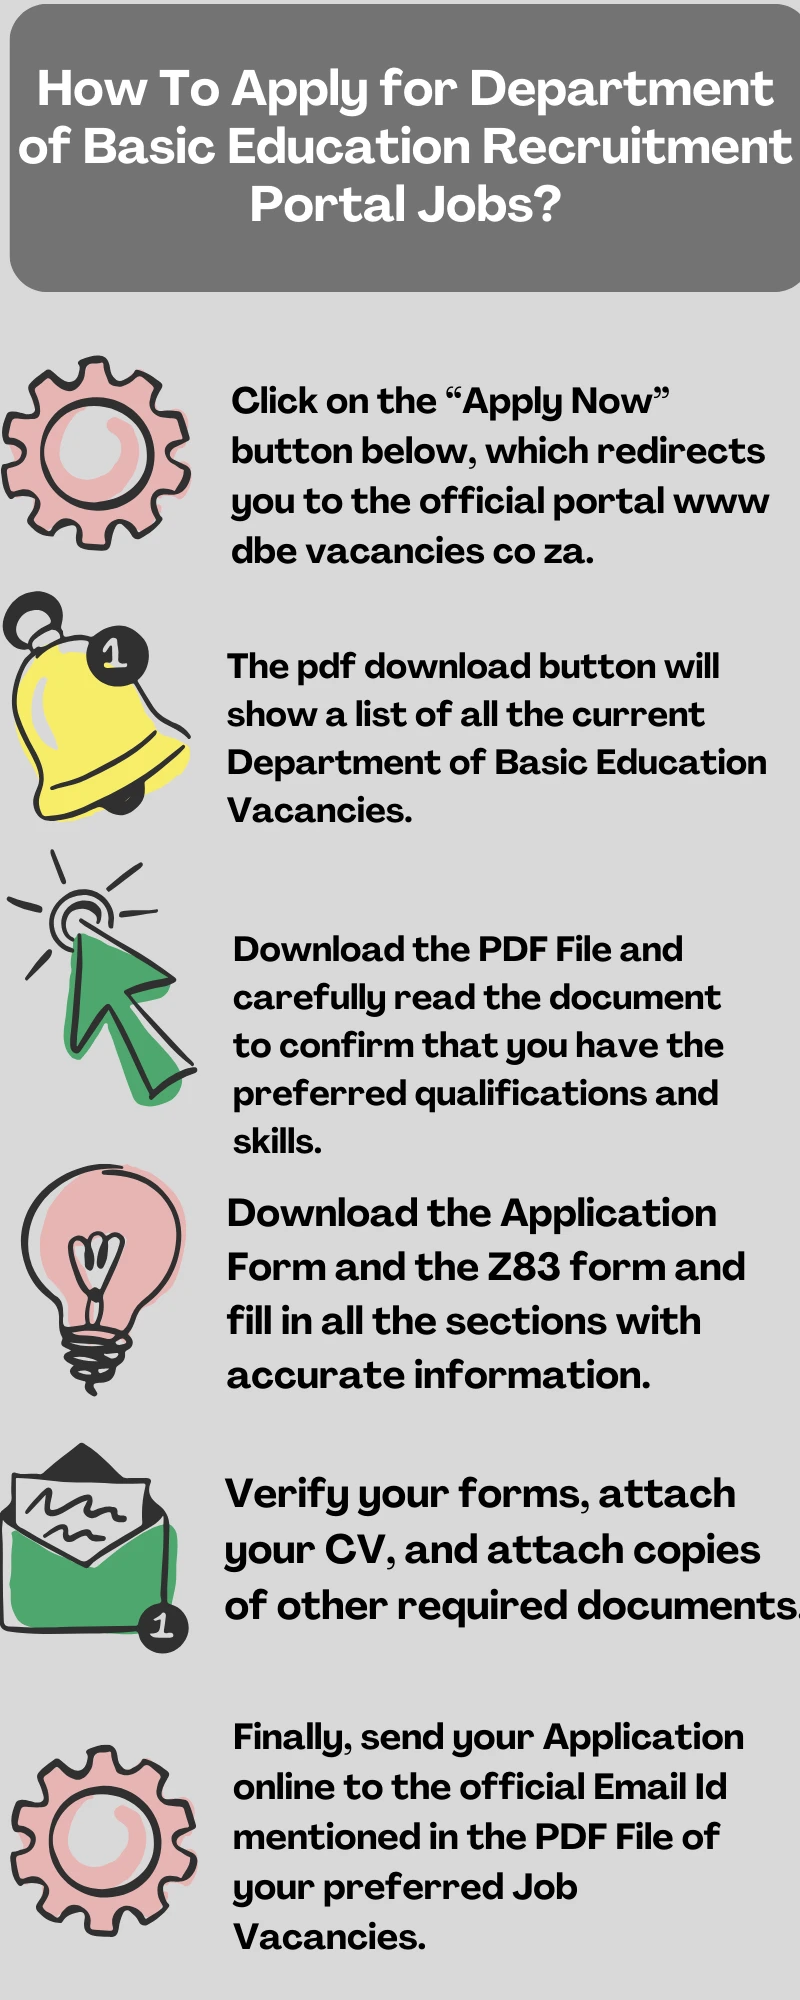 How To Apply for Department of Basic Education Recruitment Portal Jobs?